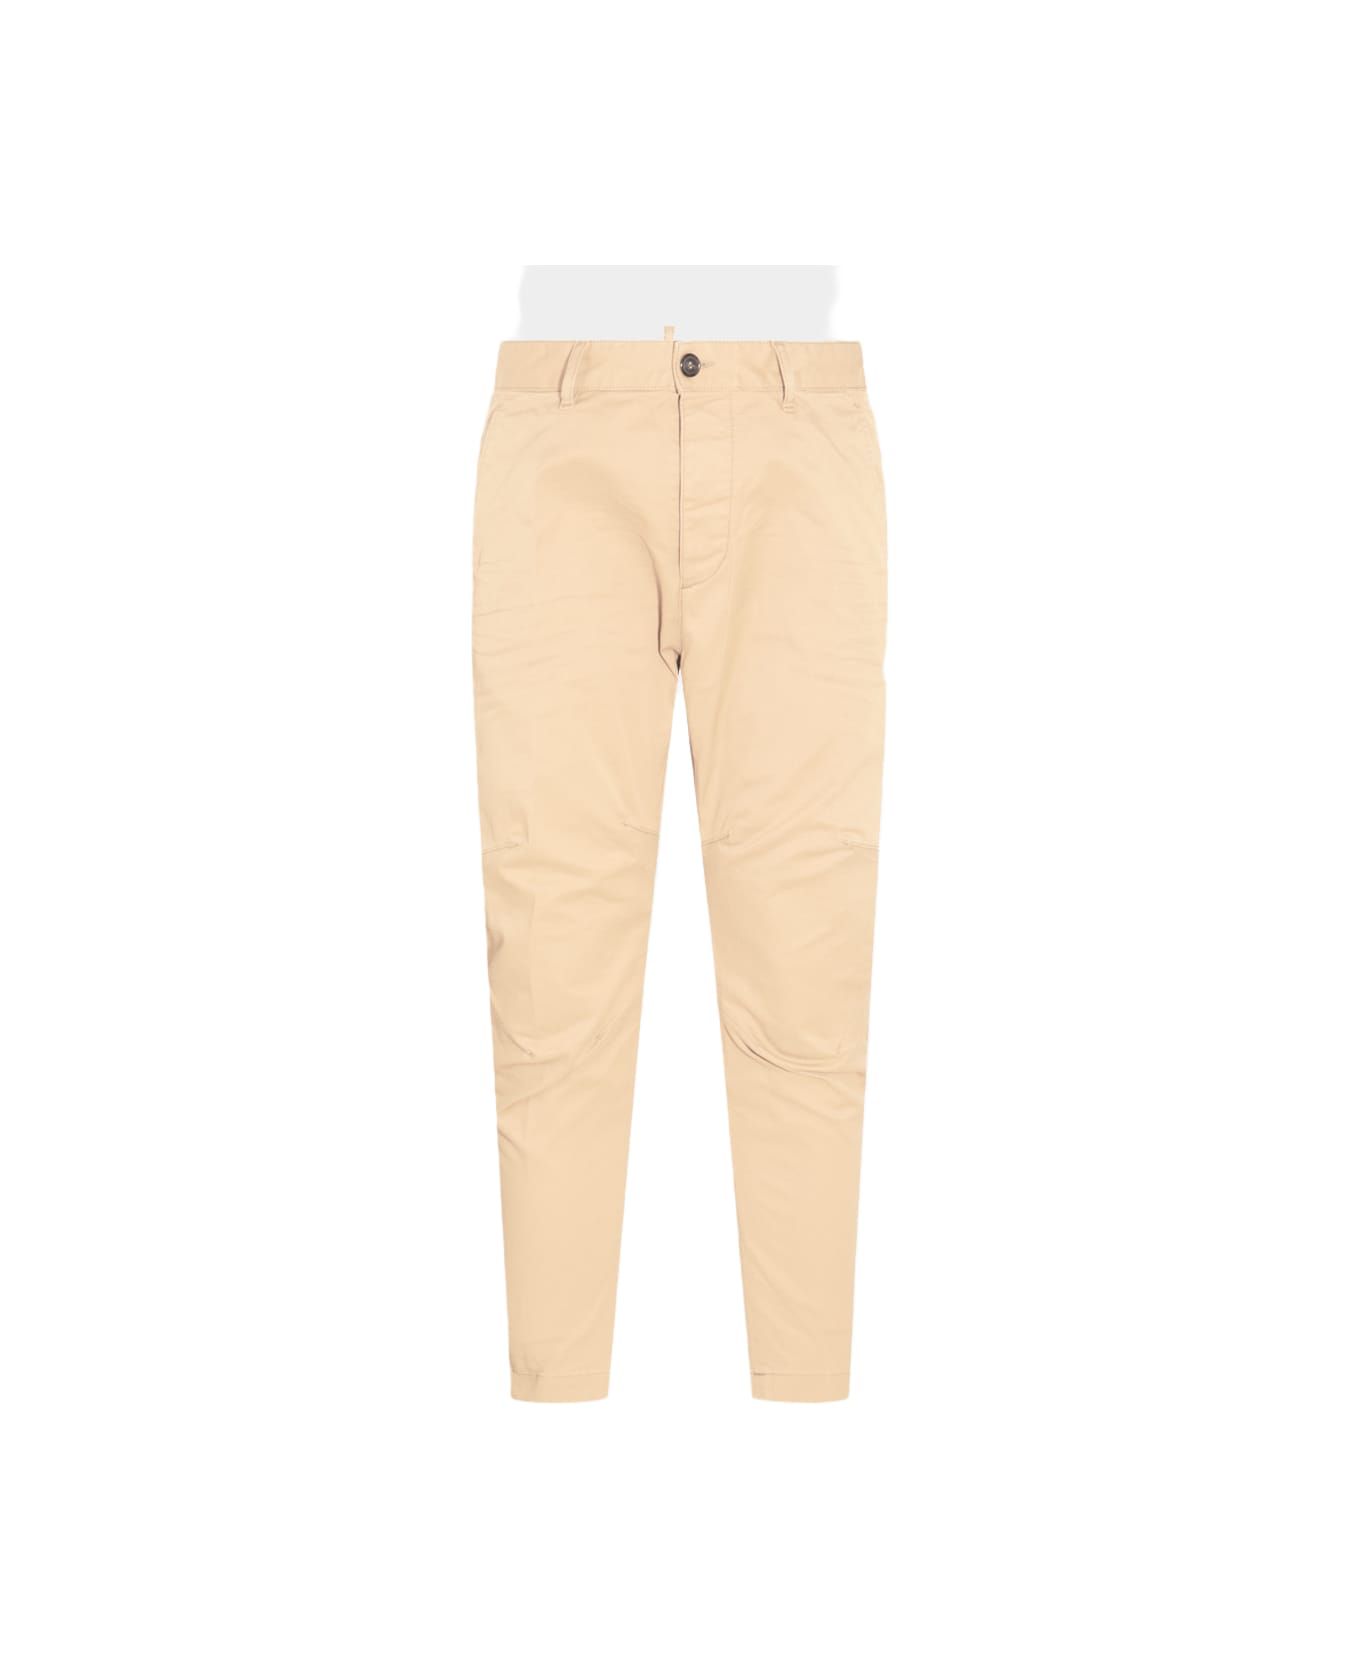 Dsquared2 Beige Cotton Blend Trousers - Stone ボトムス